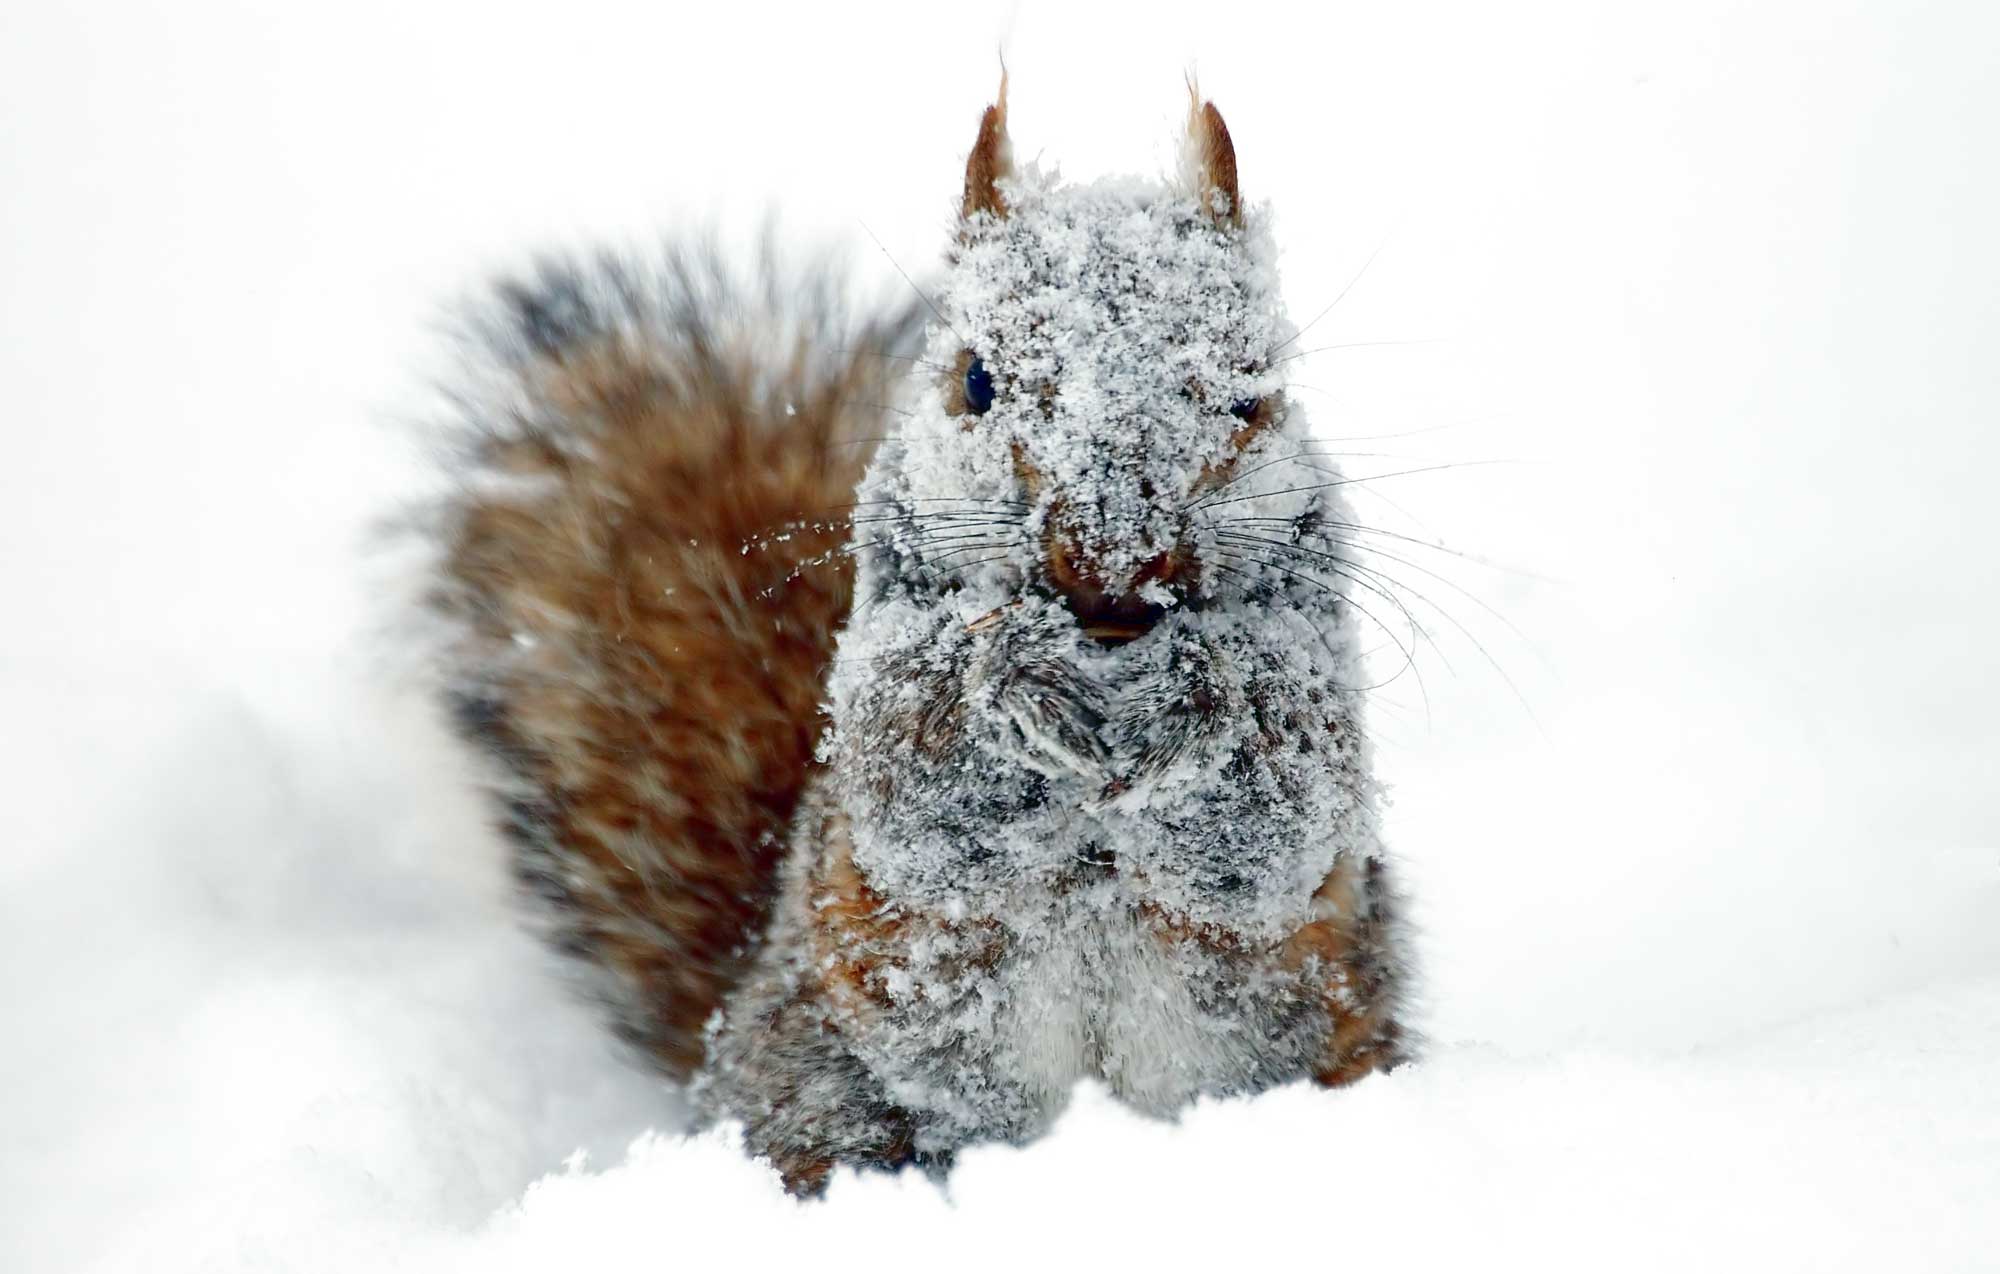 A gray squirrel in the snow.